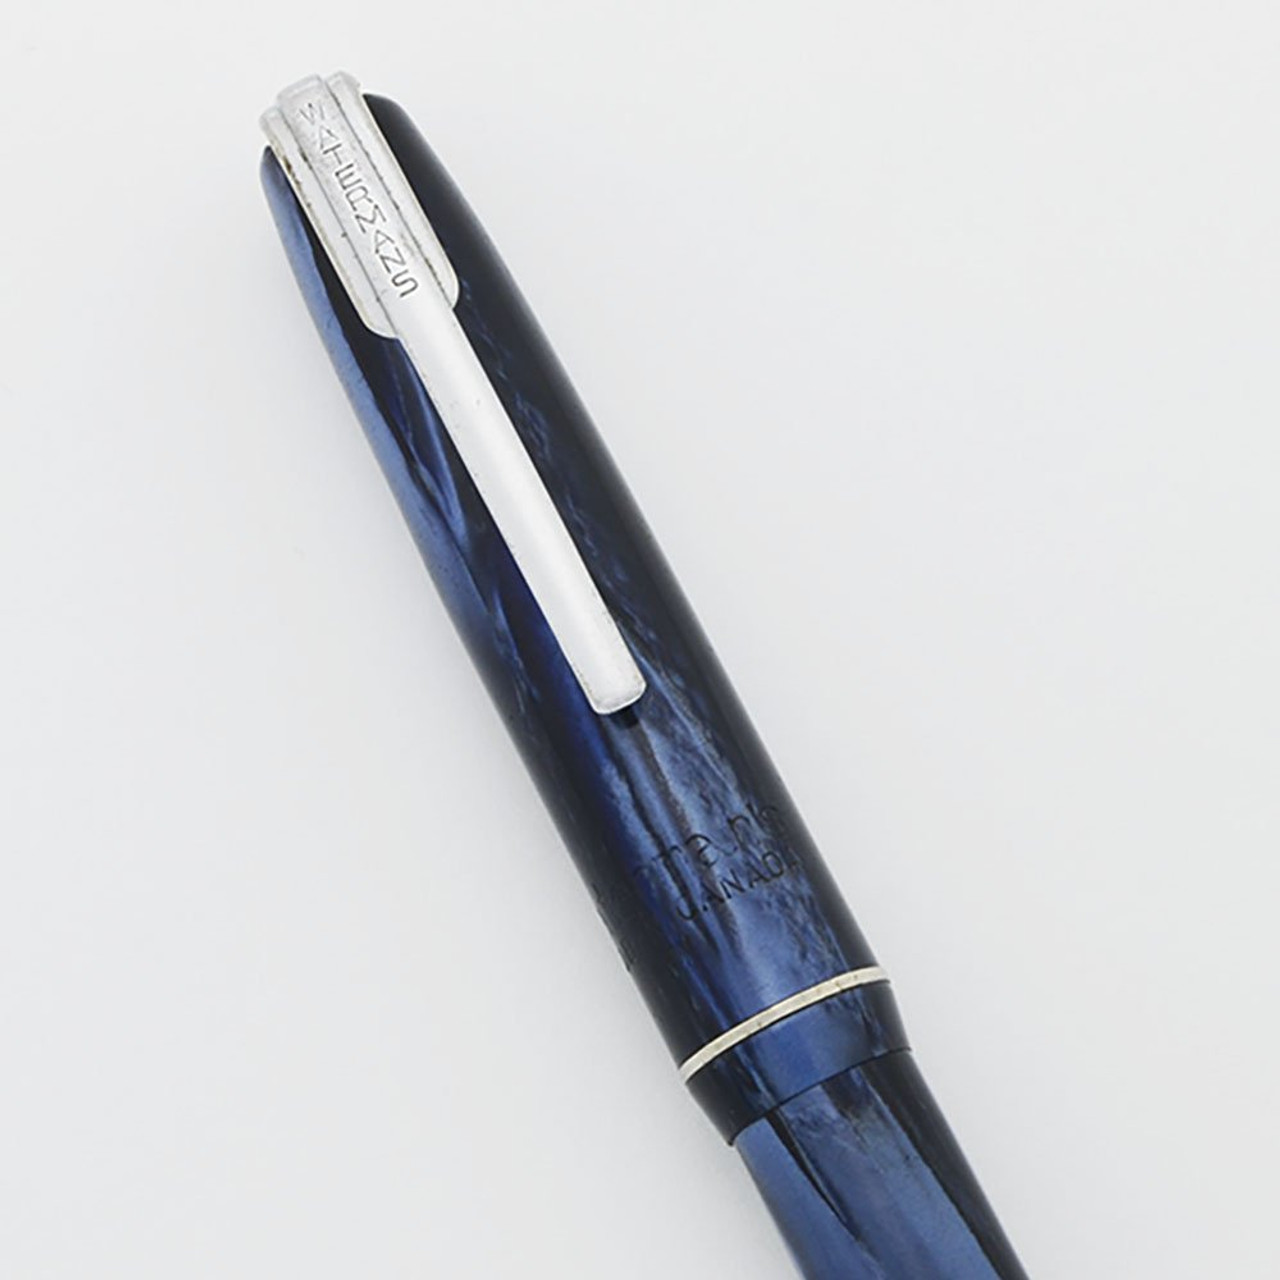 Waterman Dauntless Mechanical Pencil (Canada) - Blue Marble, CT, 1.1mm Leads (Excellent +, Restored)